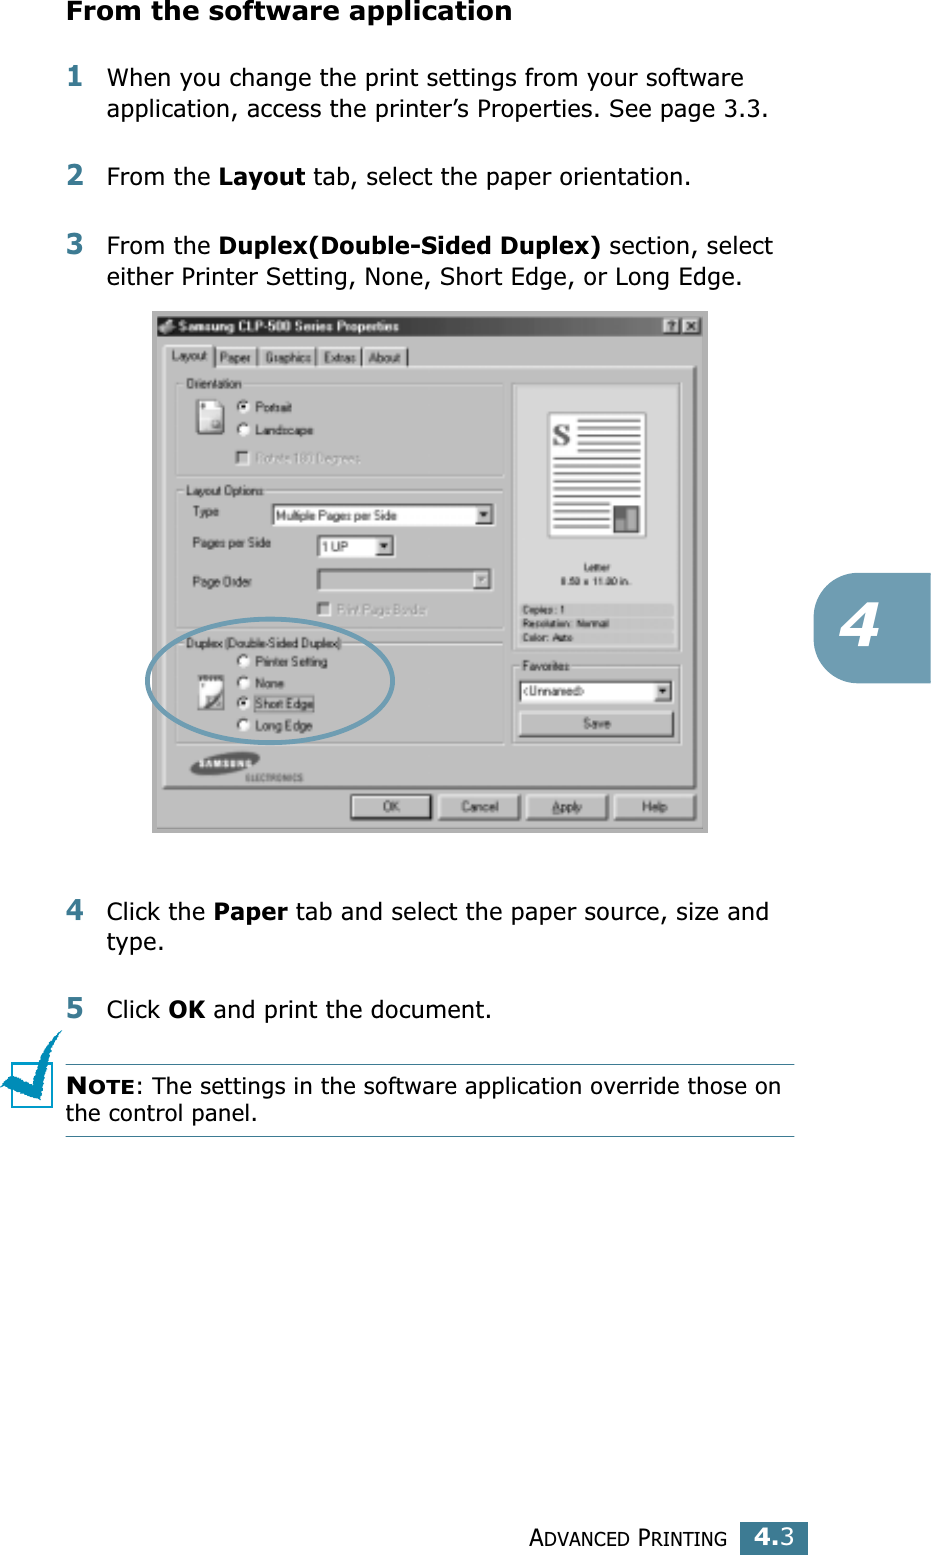 ADVANCED PRINTING4.34From the software application1When you change the print settings from your software application, access the printer’s Properties. See page 3.3.2From the Layout tab, select the paper orientation.3From the Duplex(Double-Sided Duplex) section, select either Printer Setting, None, Short Edge, or Long Edge.4Click the Paper tab and select the paper source, size and type.5Click OK and print the document.NOTE: The settings in the software application override those on the control panel.